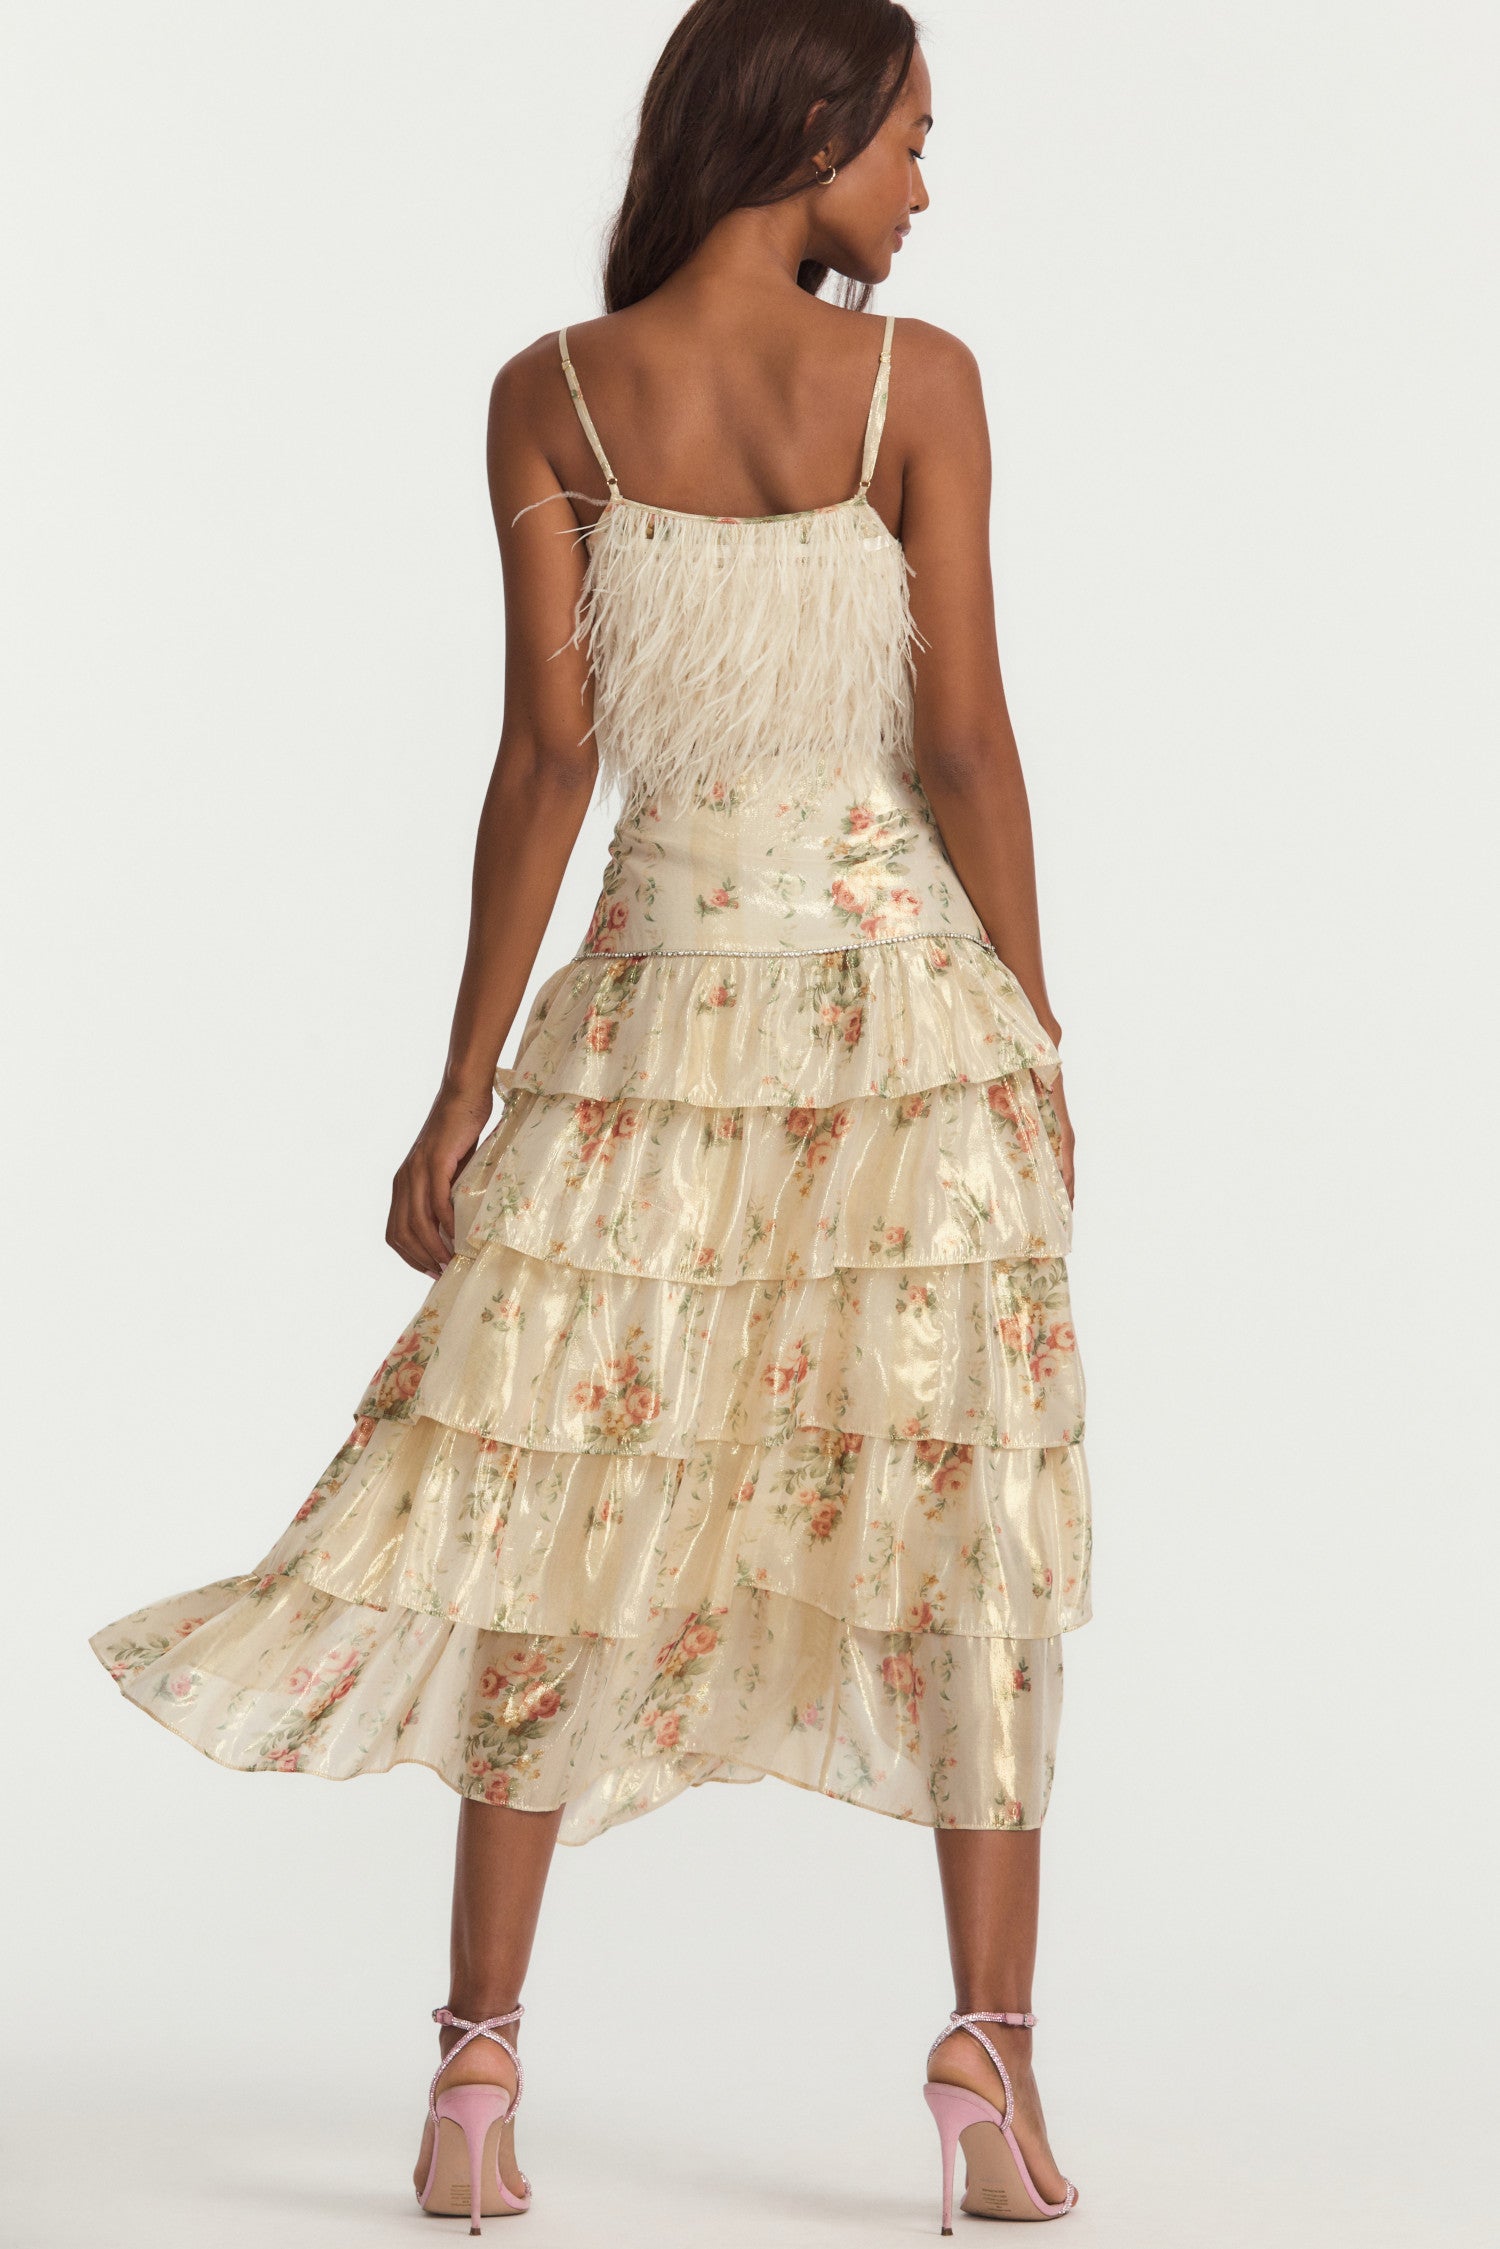 Off-white midi skirt, with floral print that paints a lurex lame fabric featuring a rhinestone trim at the flounce seam and yoke, a slit on the left, and a gold exposed metal zipper. 